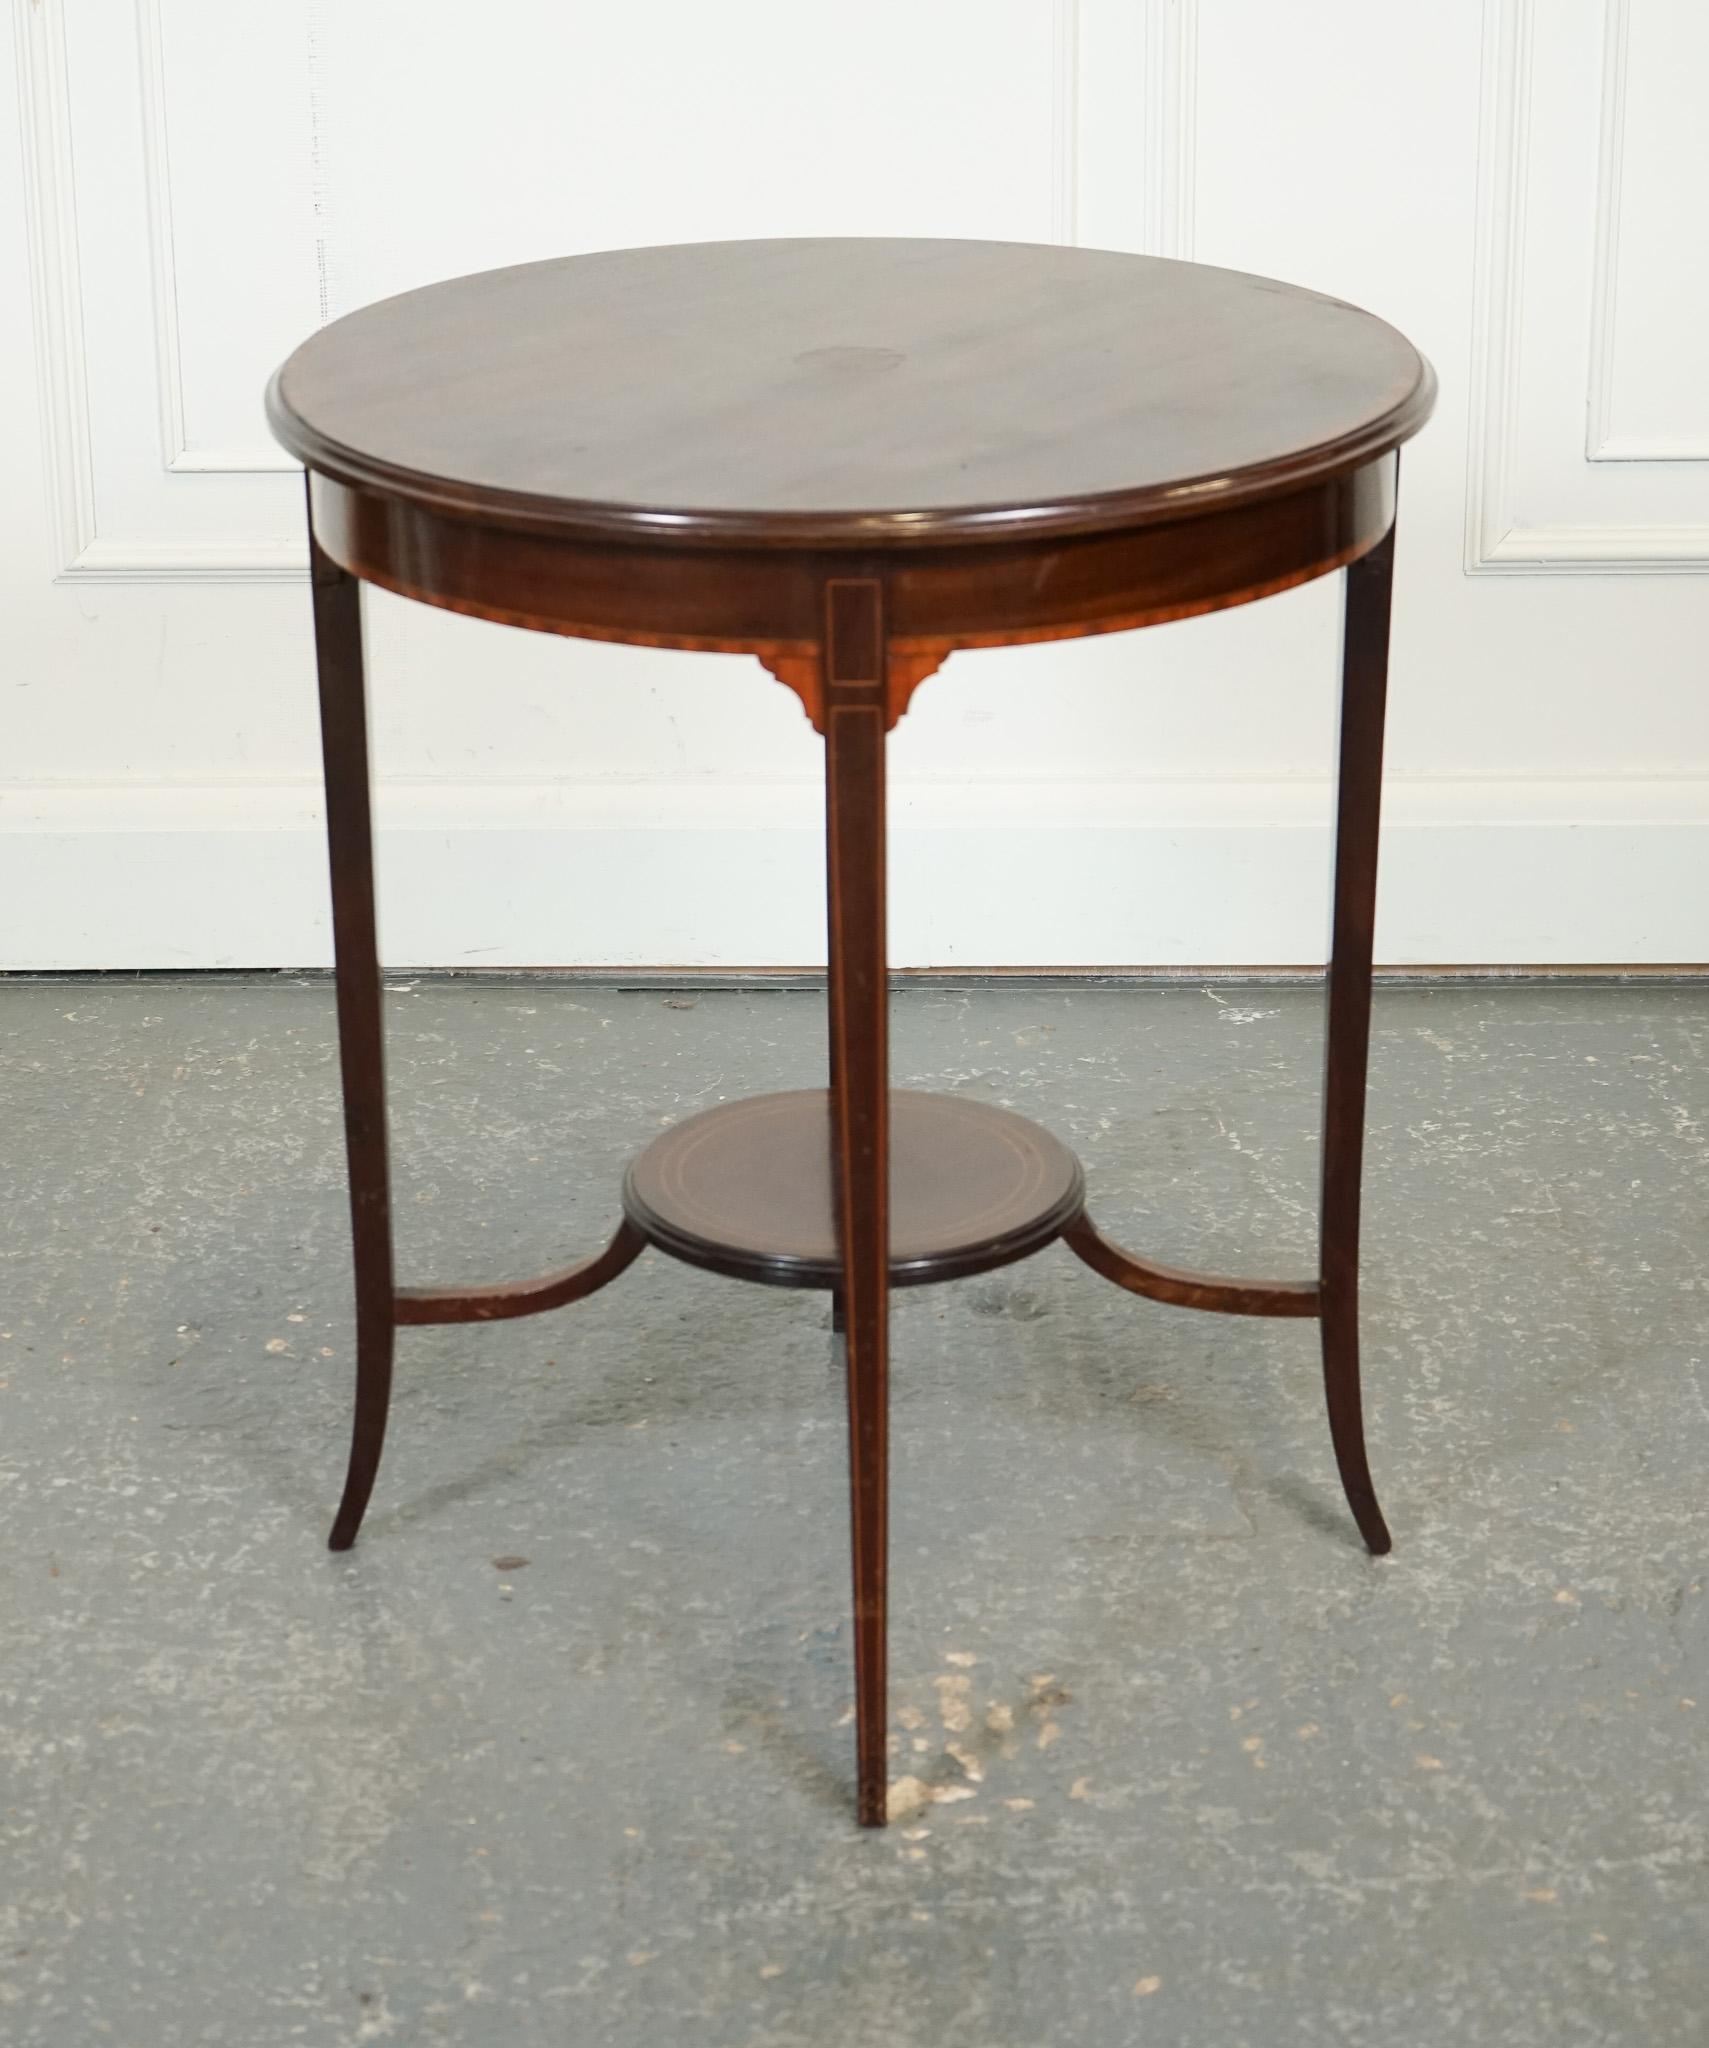 

We are delighted to offer for sale this Edwardian Side End Wine Lamp Table.

This Edwardian side end wine lamp table is a beautiful and versatile piece of furniture that showcases the elegance and craftsmanship characteristic of the Edwardian